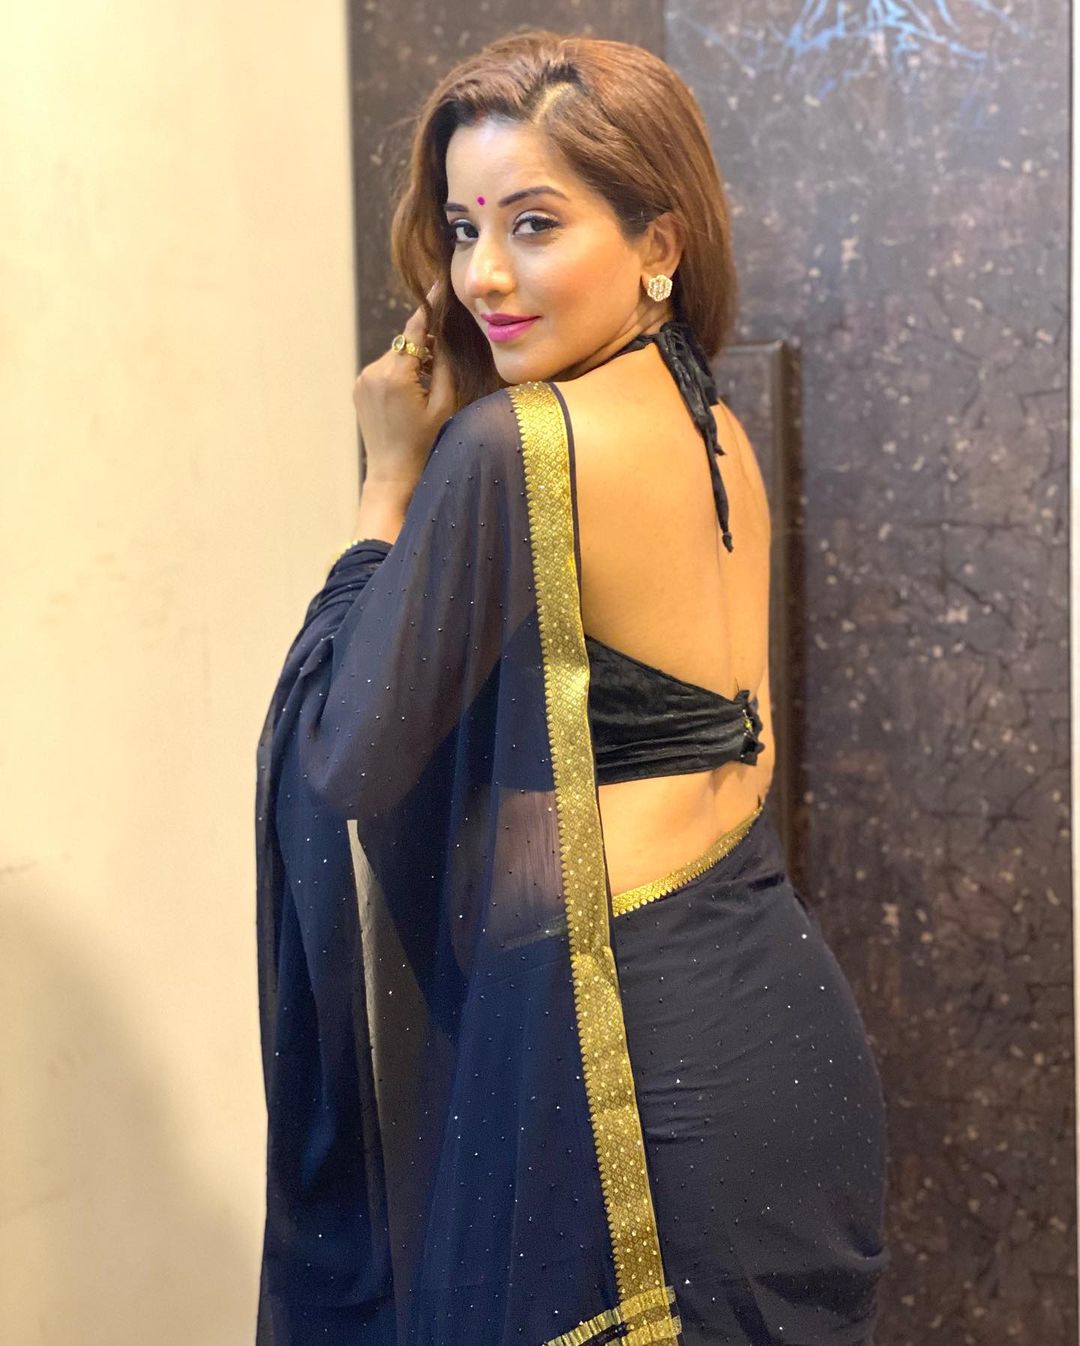 Backless - Saree with Gorgeous Backless Blouse